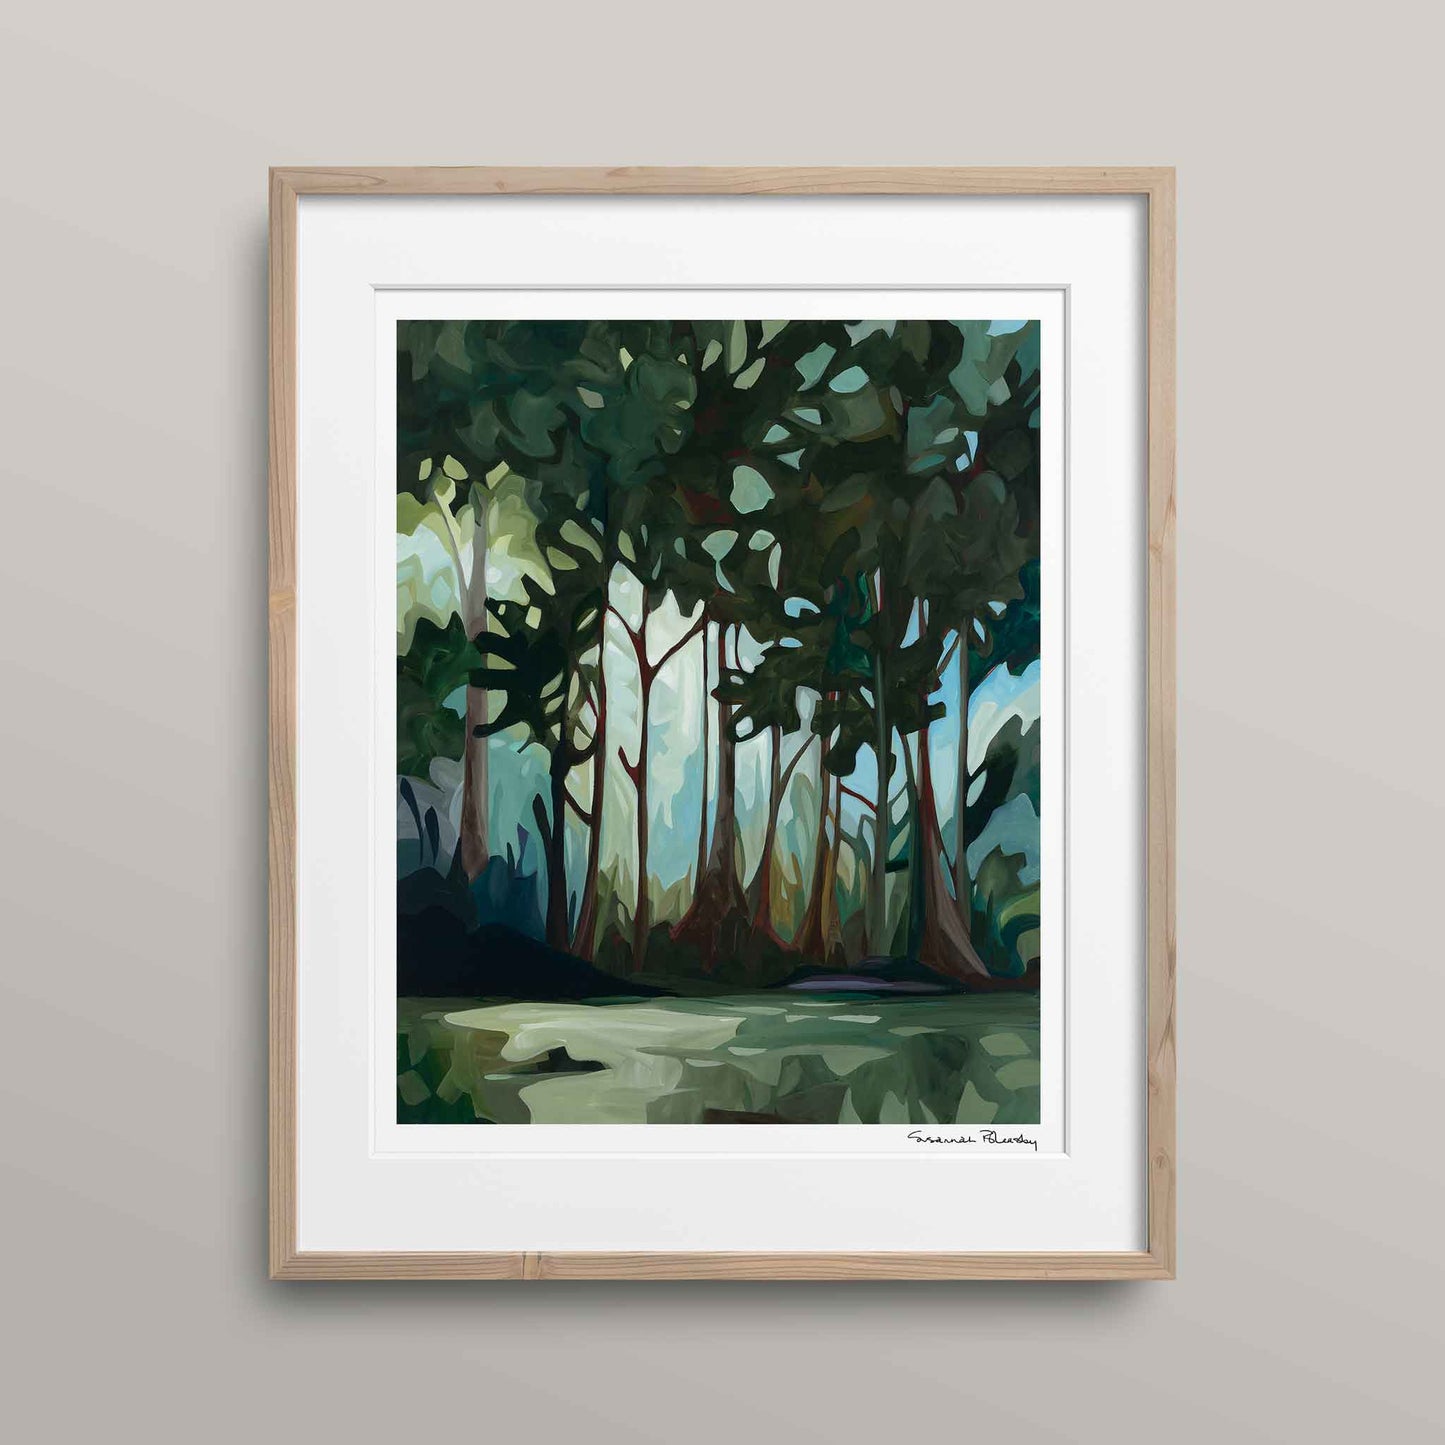 Tanglewood is an acrylic landscape painting and art print of a forest park that captures nature's beauty and tranquility.